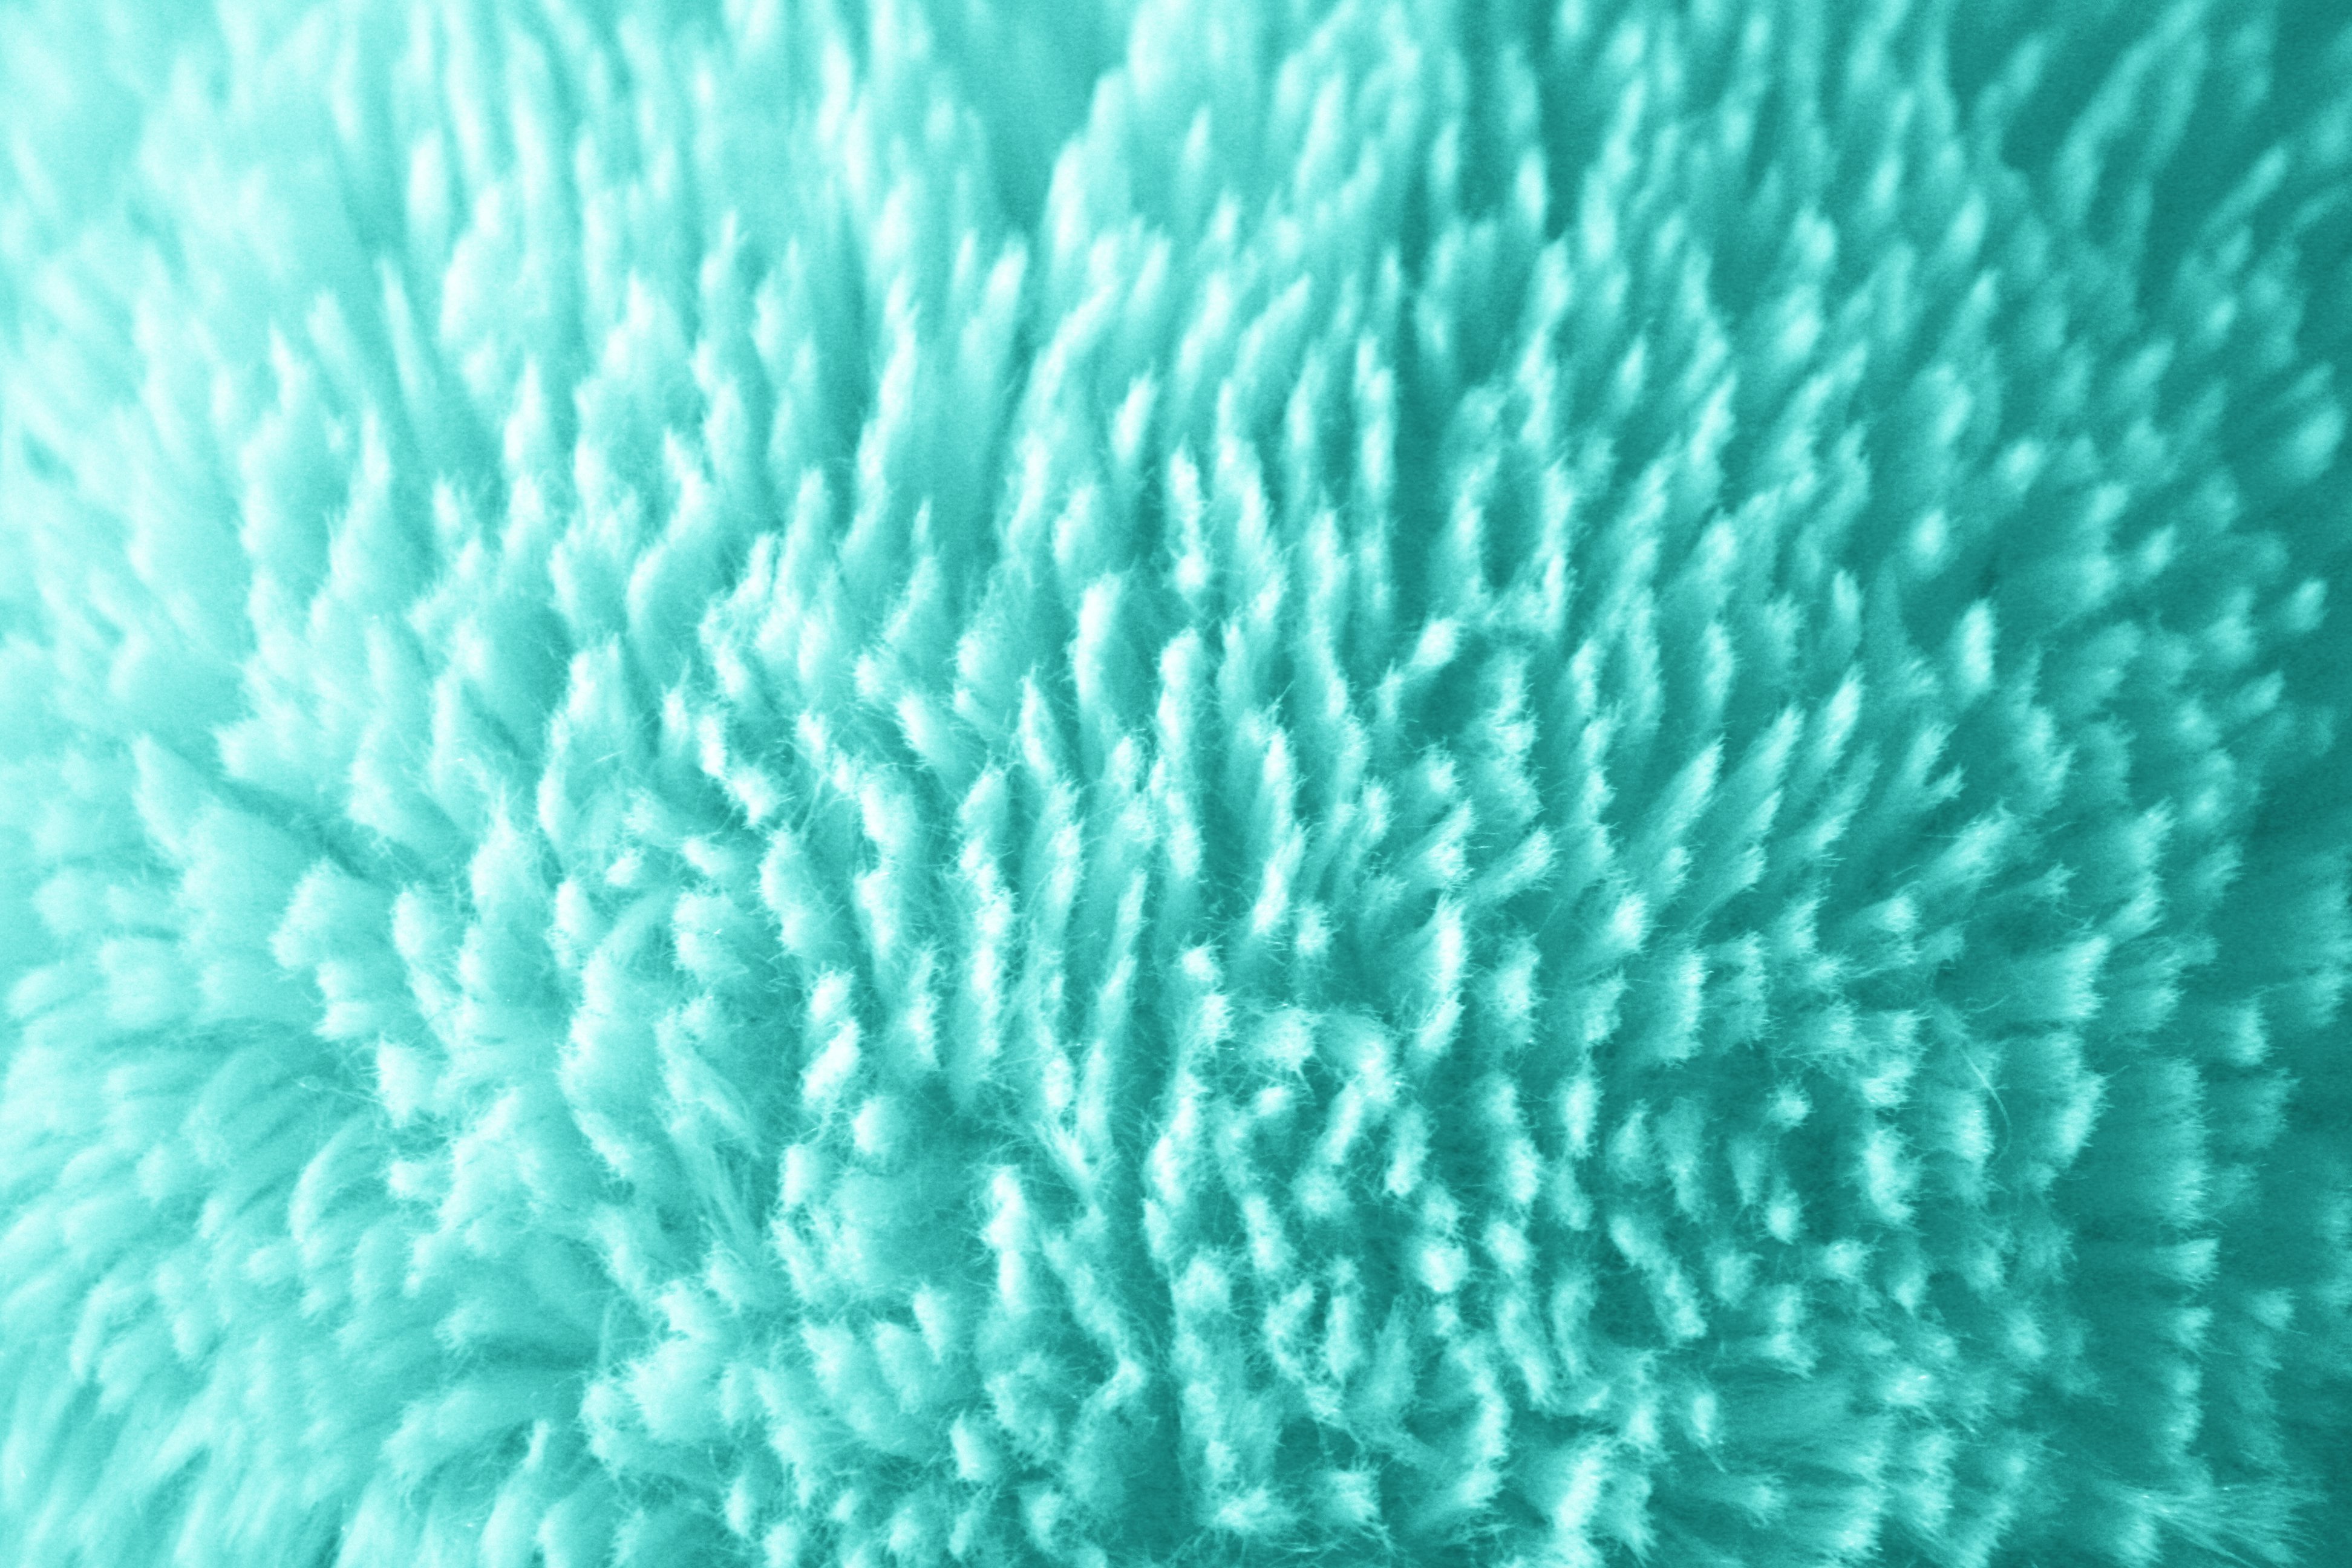 3888 x 2592 jpeg 1369kB Plush Teal Fabric Texture Picture Free